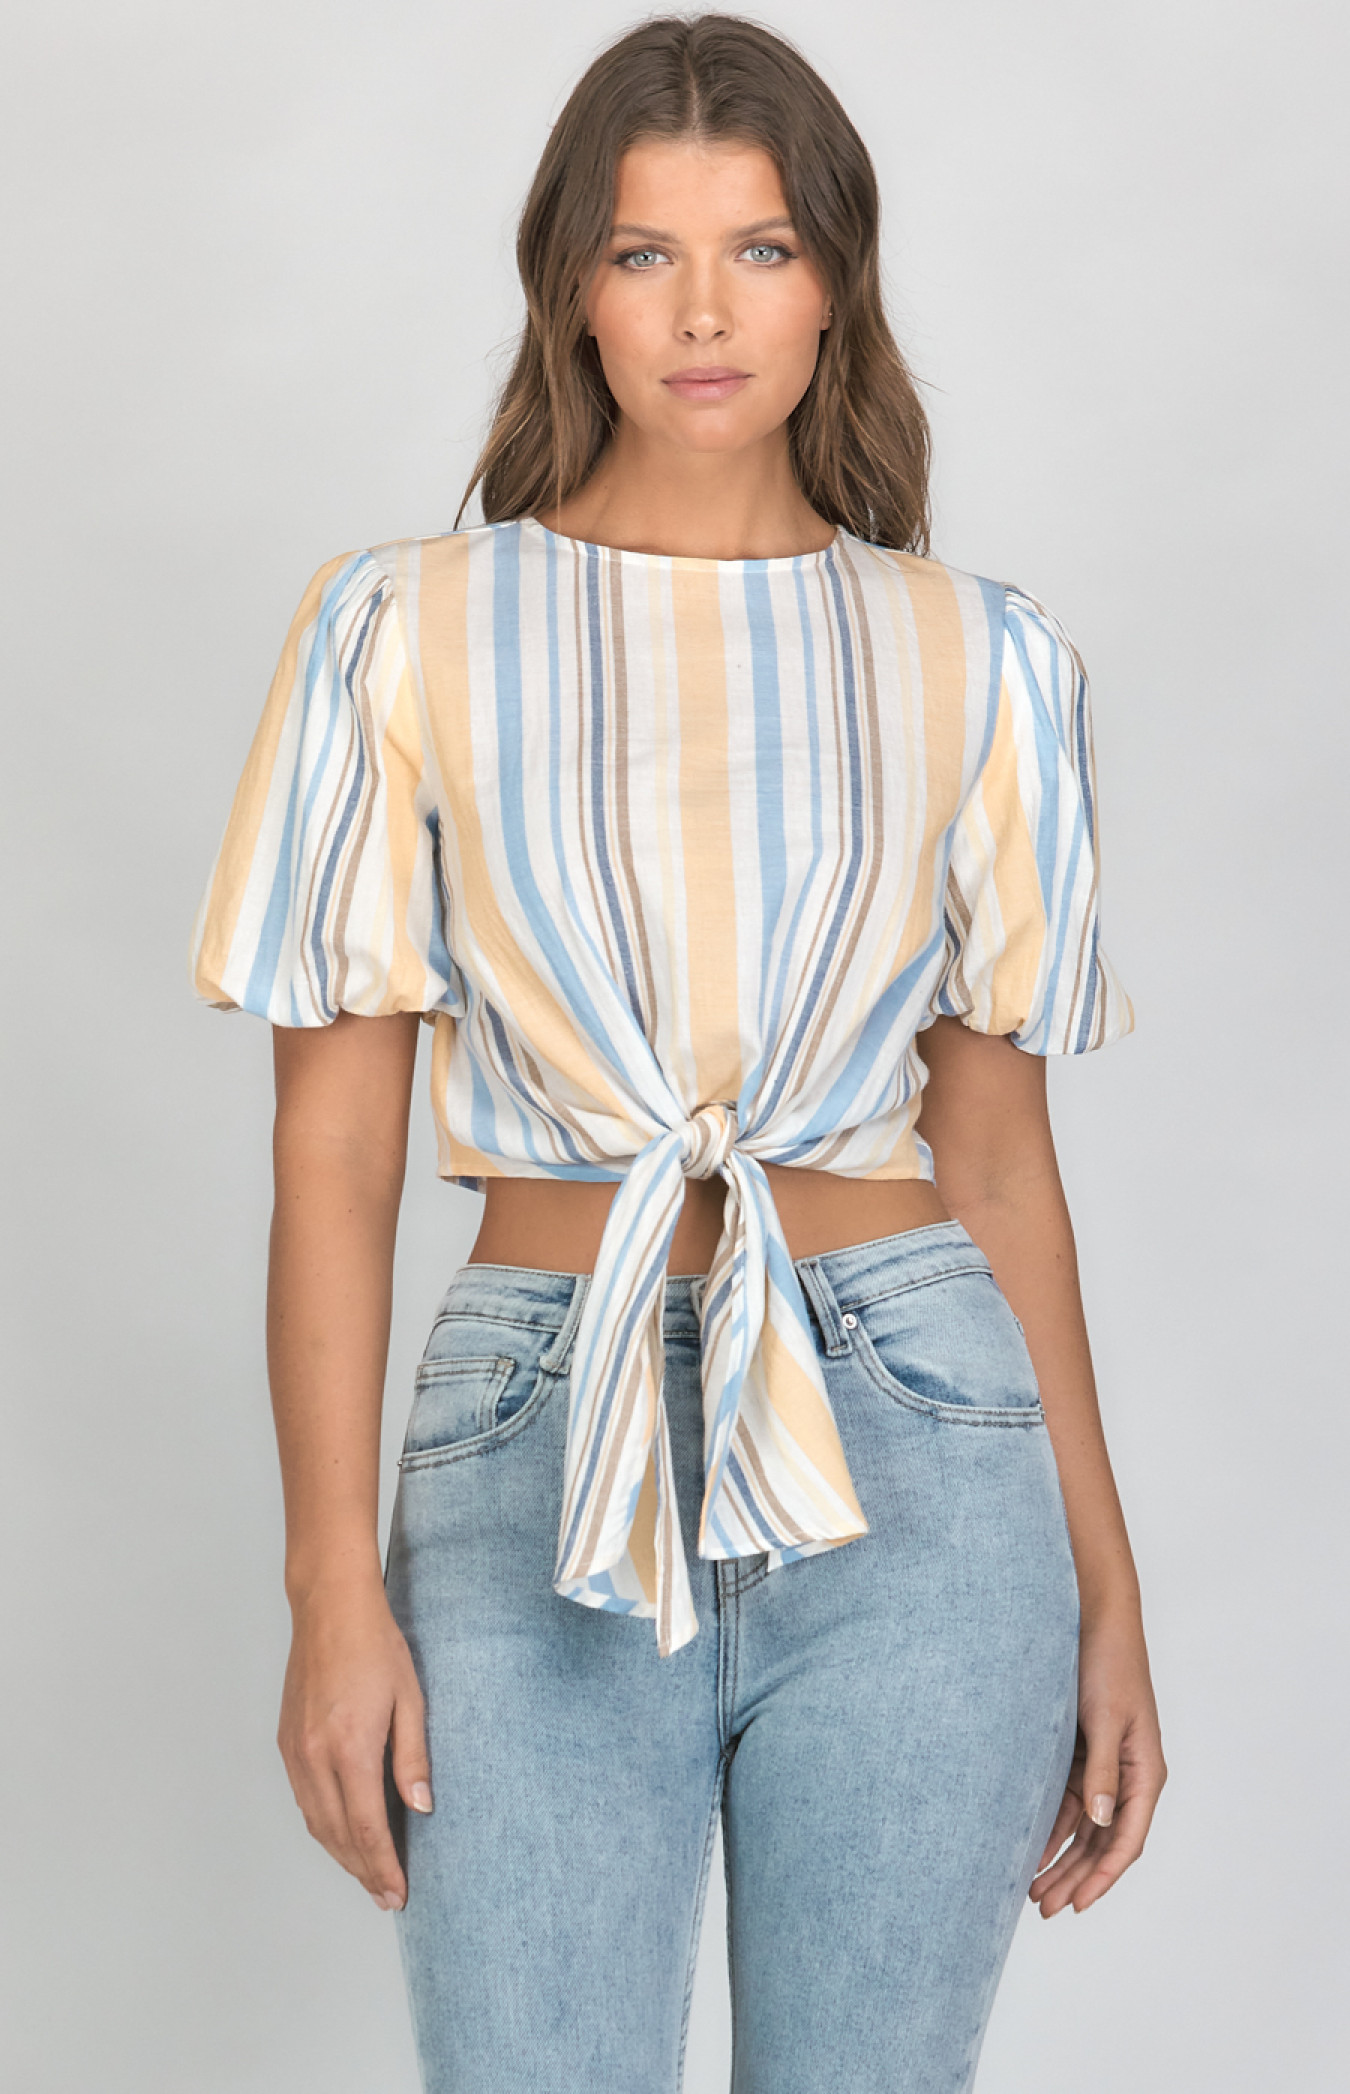 Striped Tie Front Top with Puff Sleeves (STO594B)